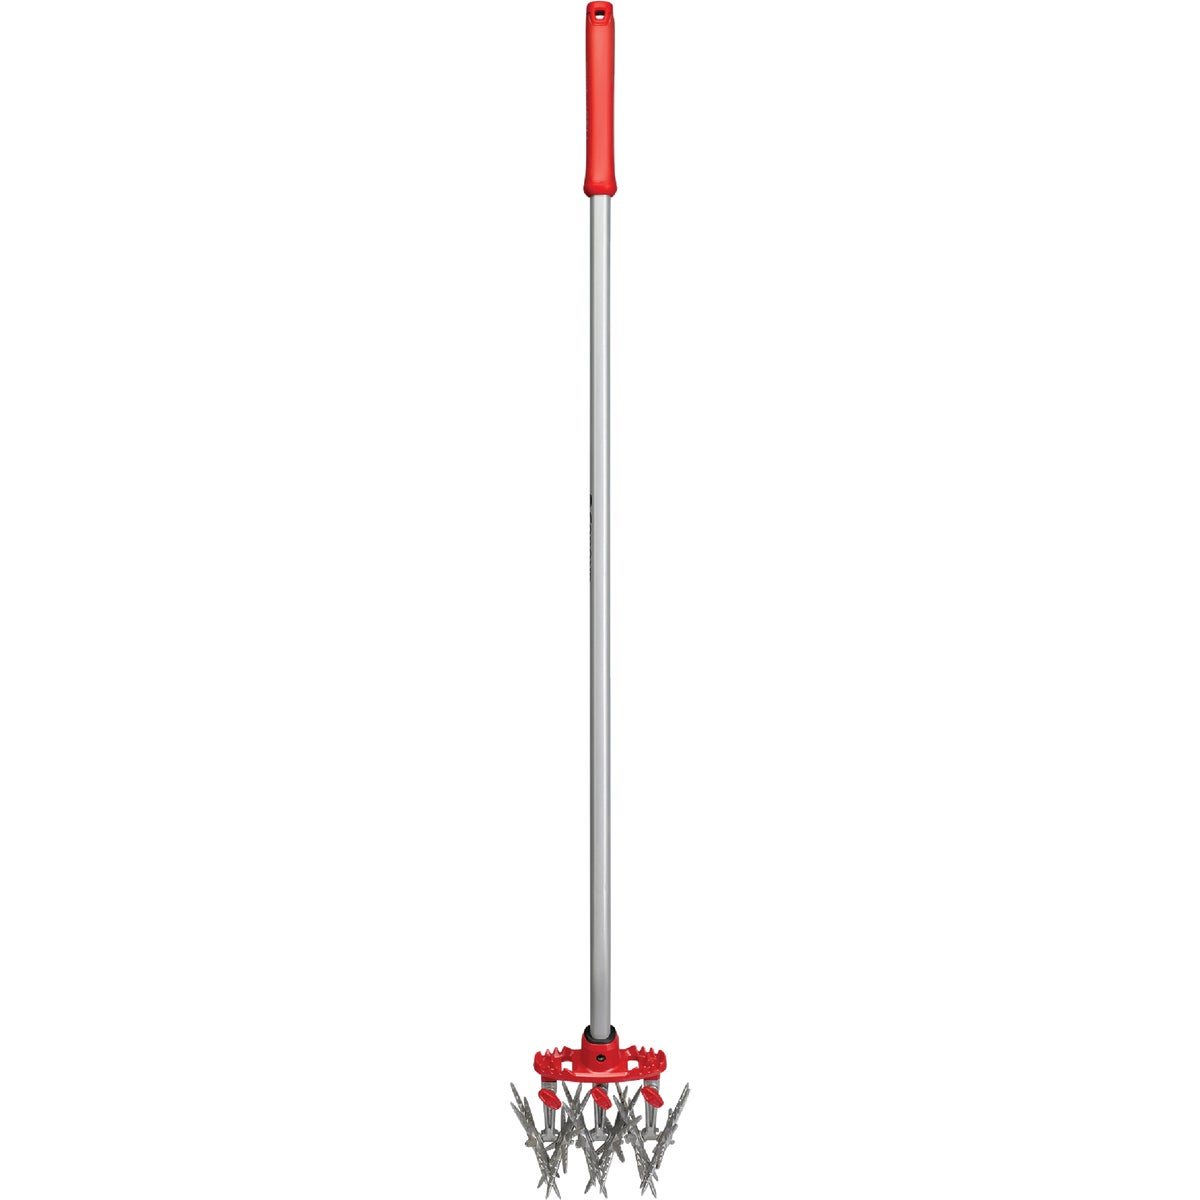 Item 705823, ComfortGEL grip garden and soil cultivator has a 3-tine configuration for 